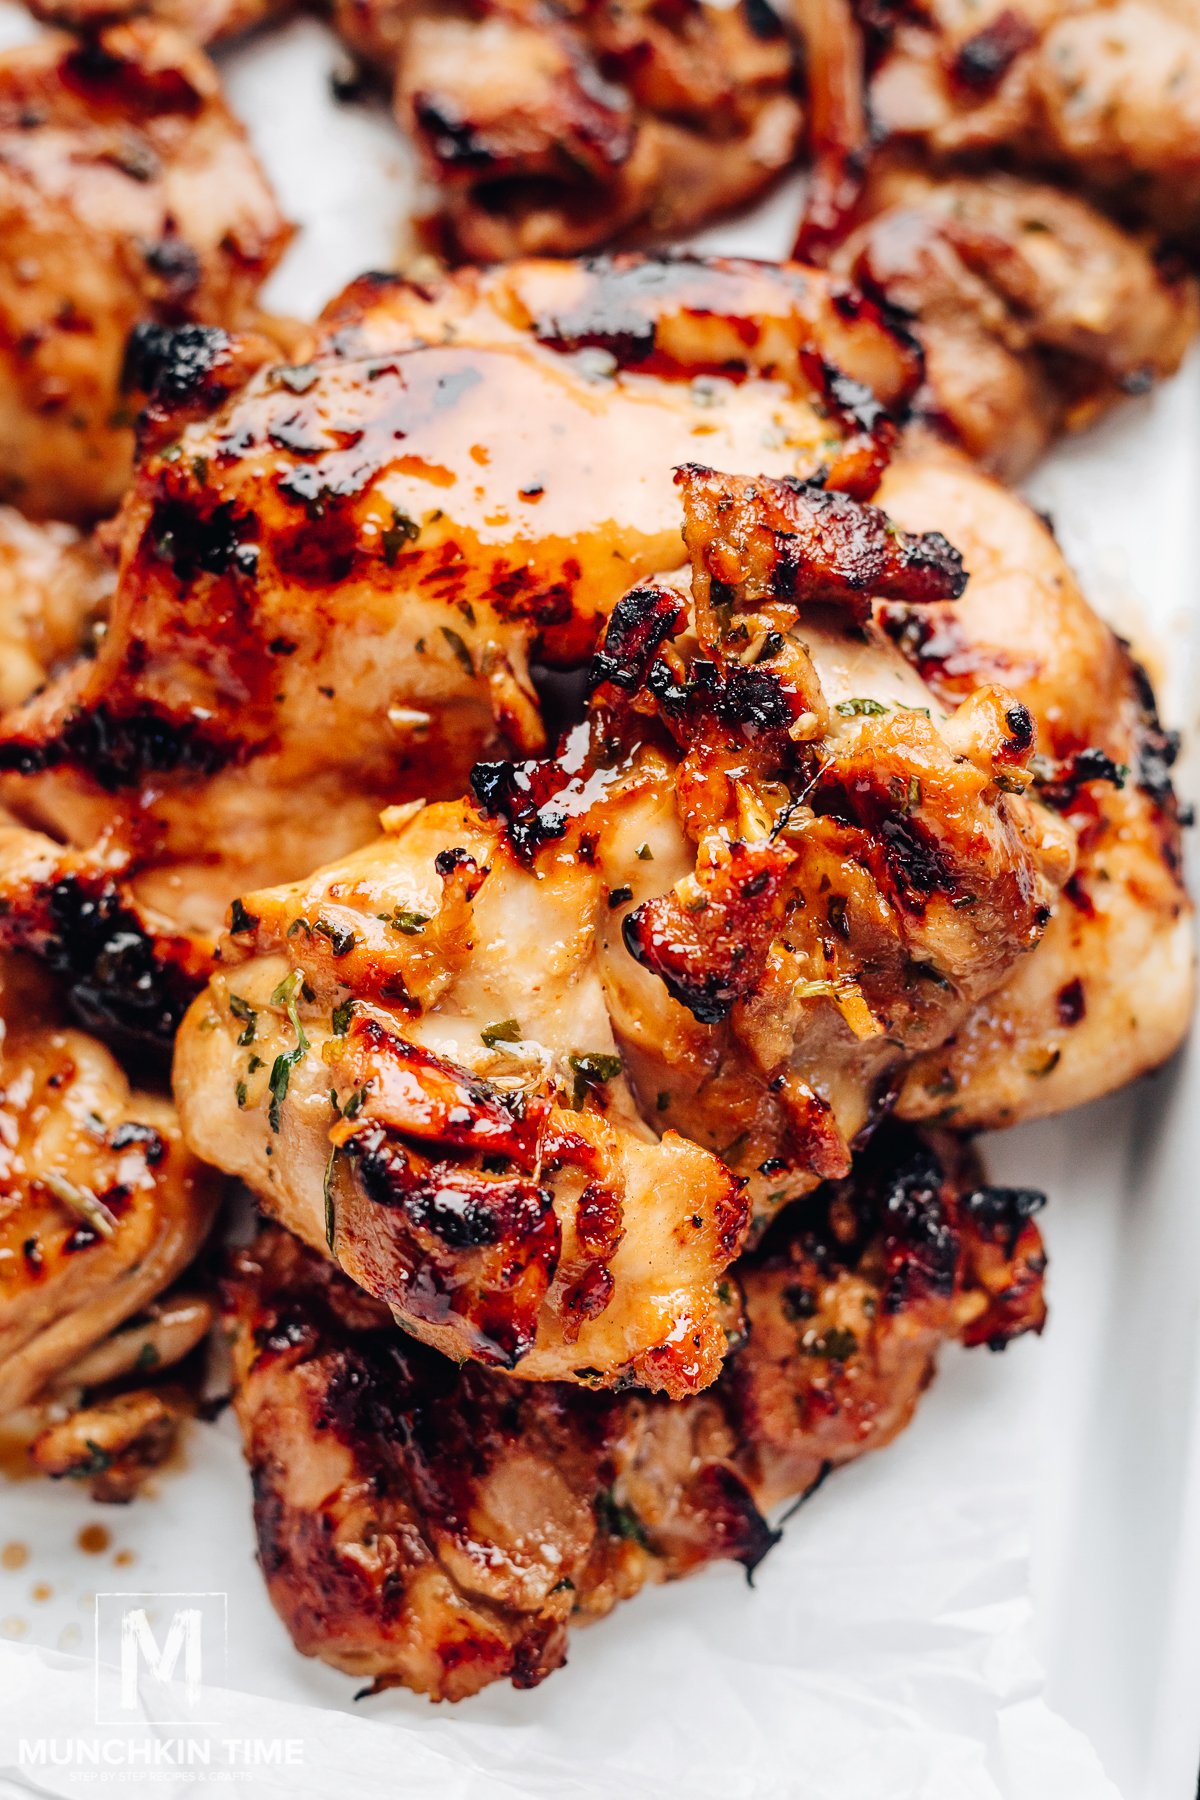 How to grill chicken thigh recipe